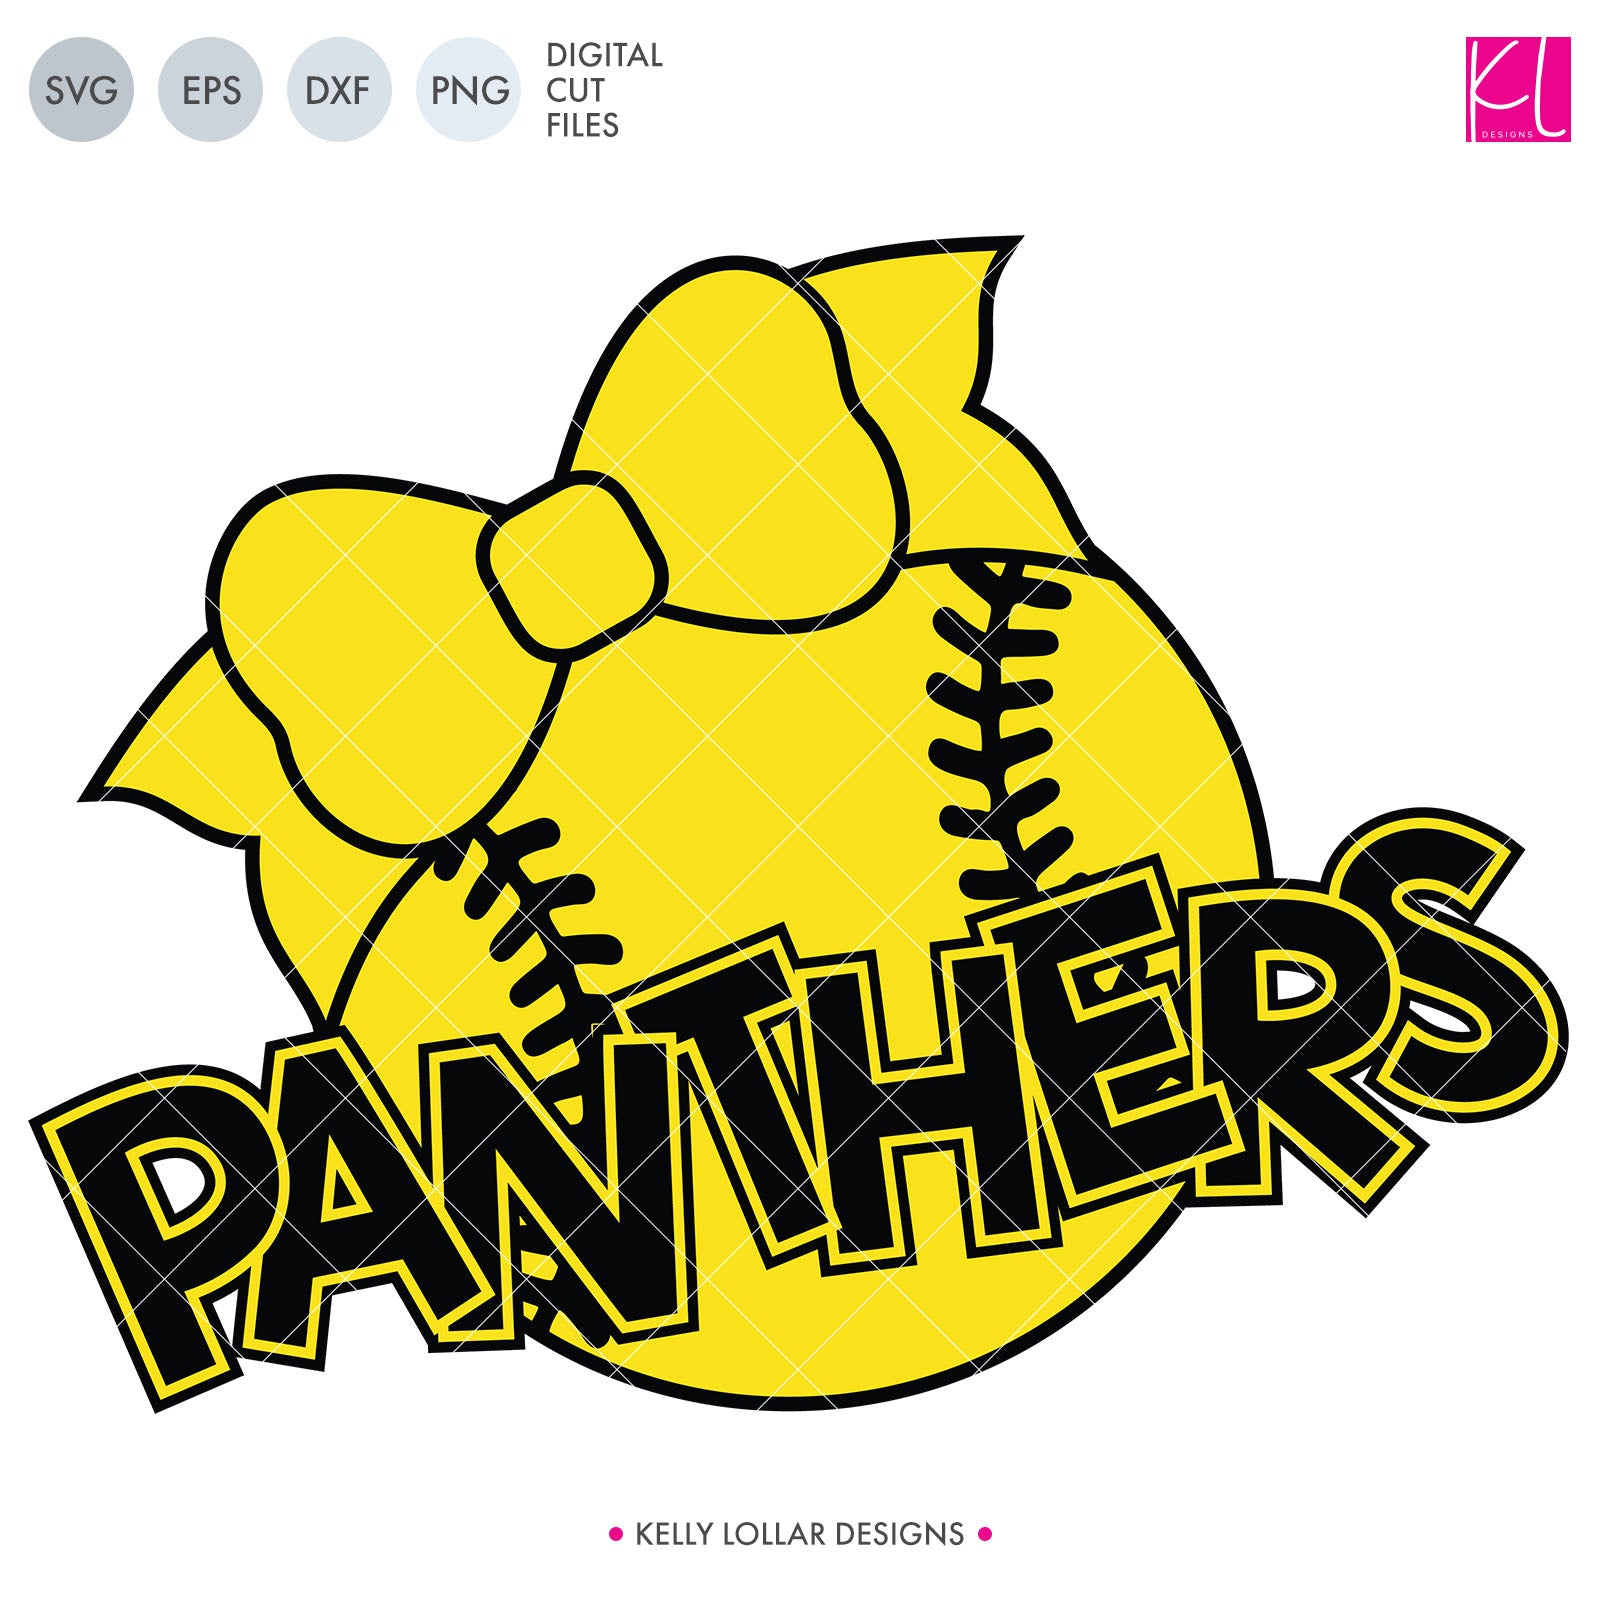 Download Panthers Baseball Softball Bundle Svg Dxf Eps Png Cut Files Kelly Lollar Designs